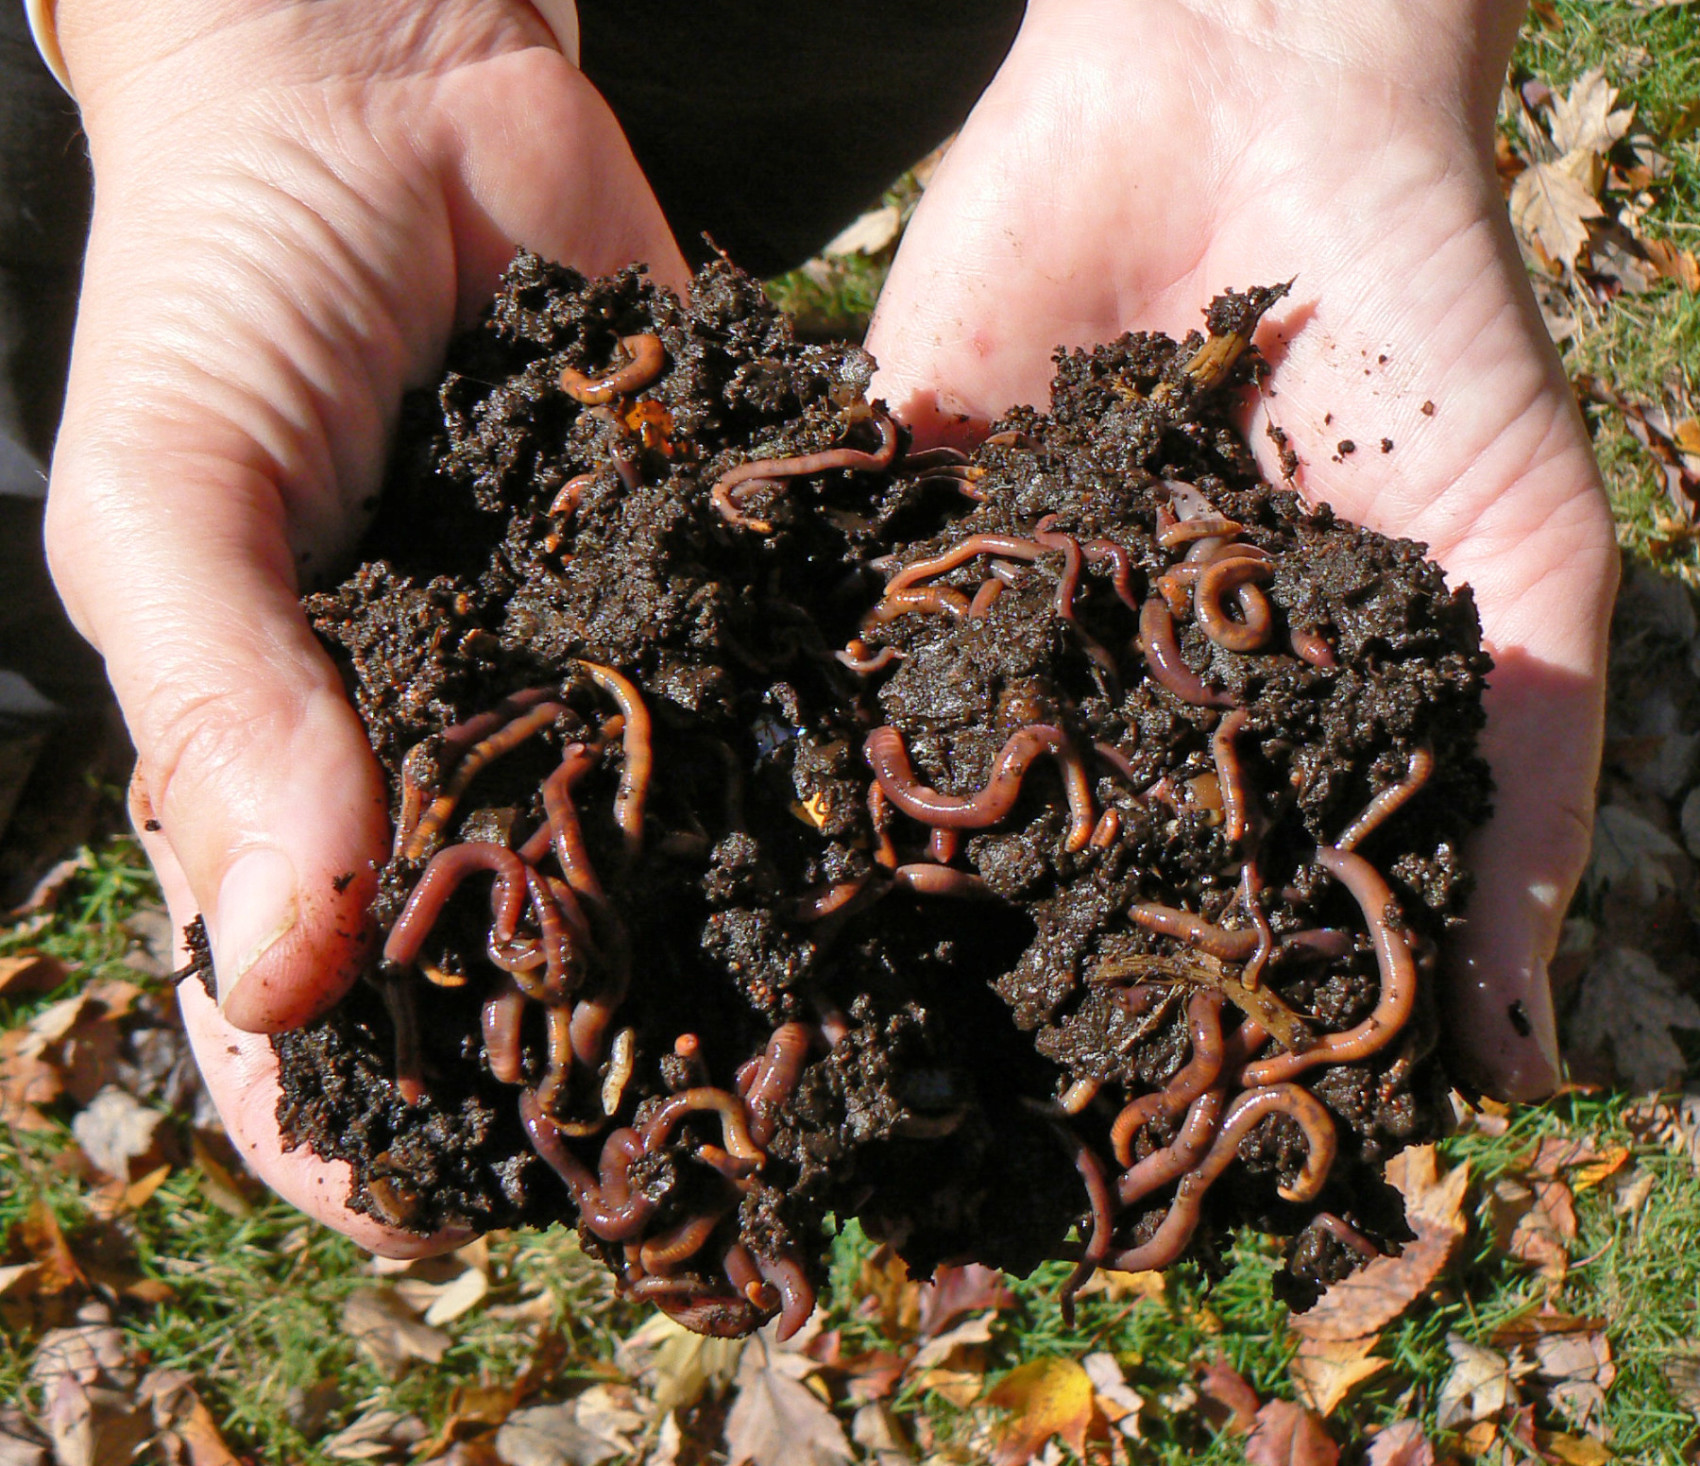 earthworms (Glenn Cantor/ Moment/ Getty Images)